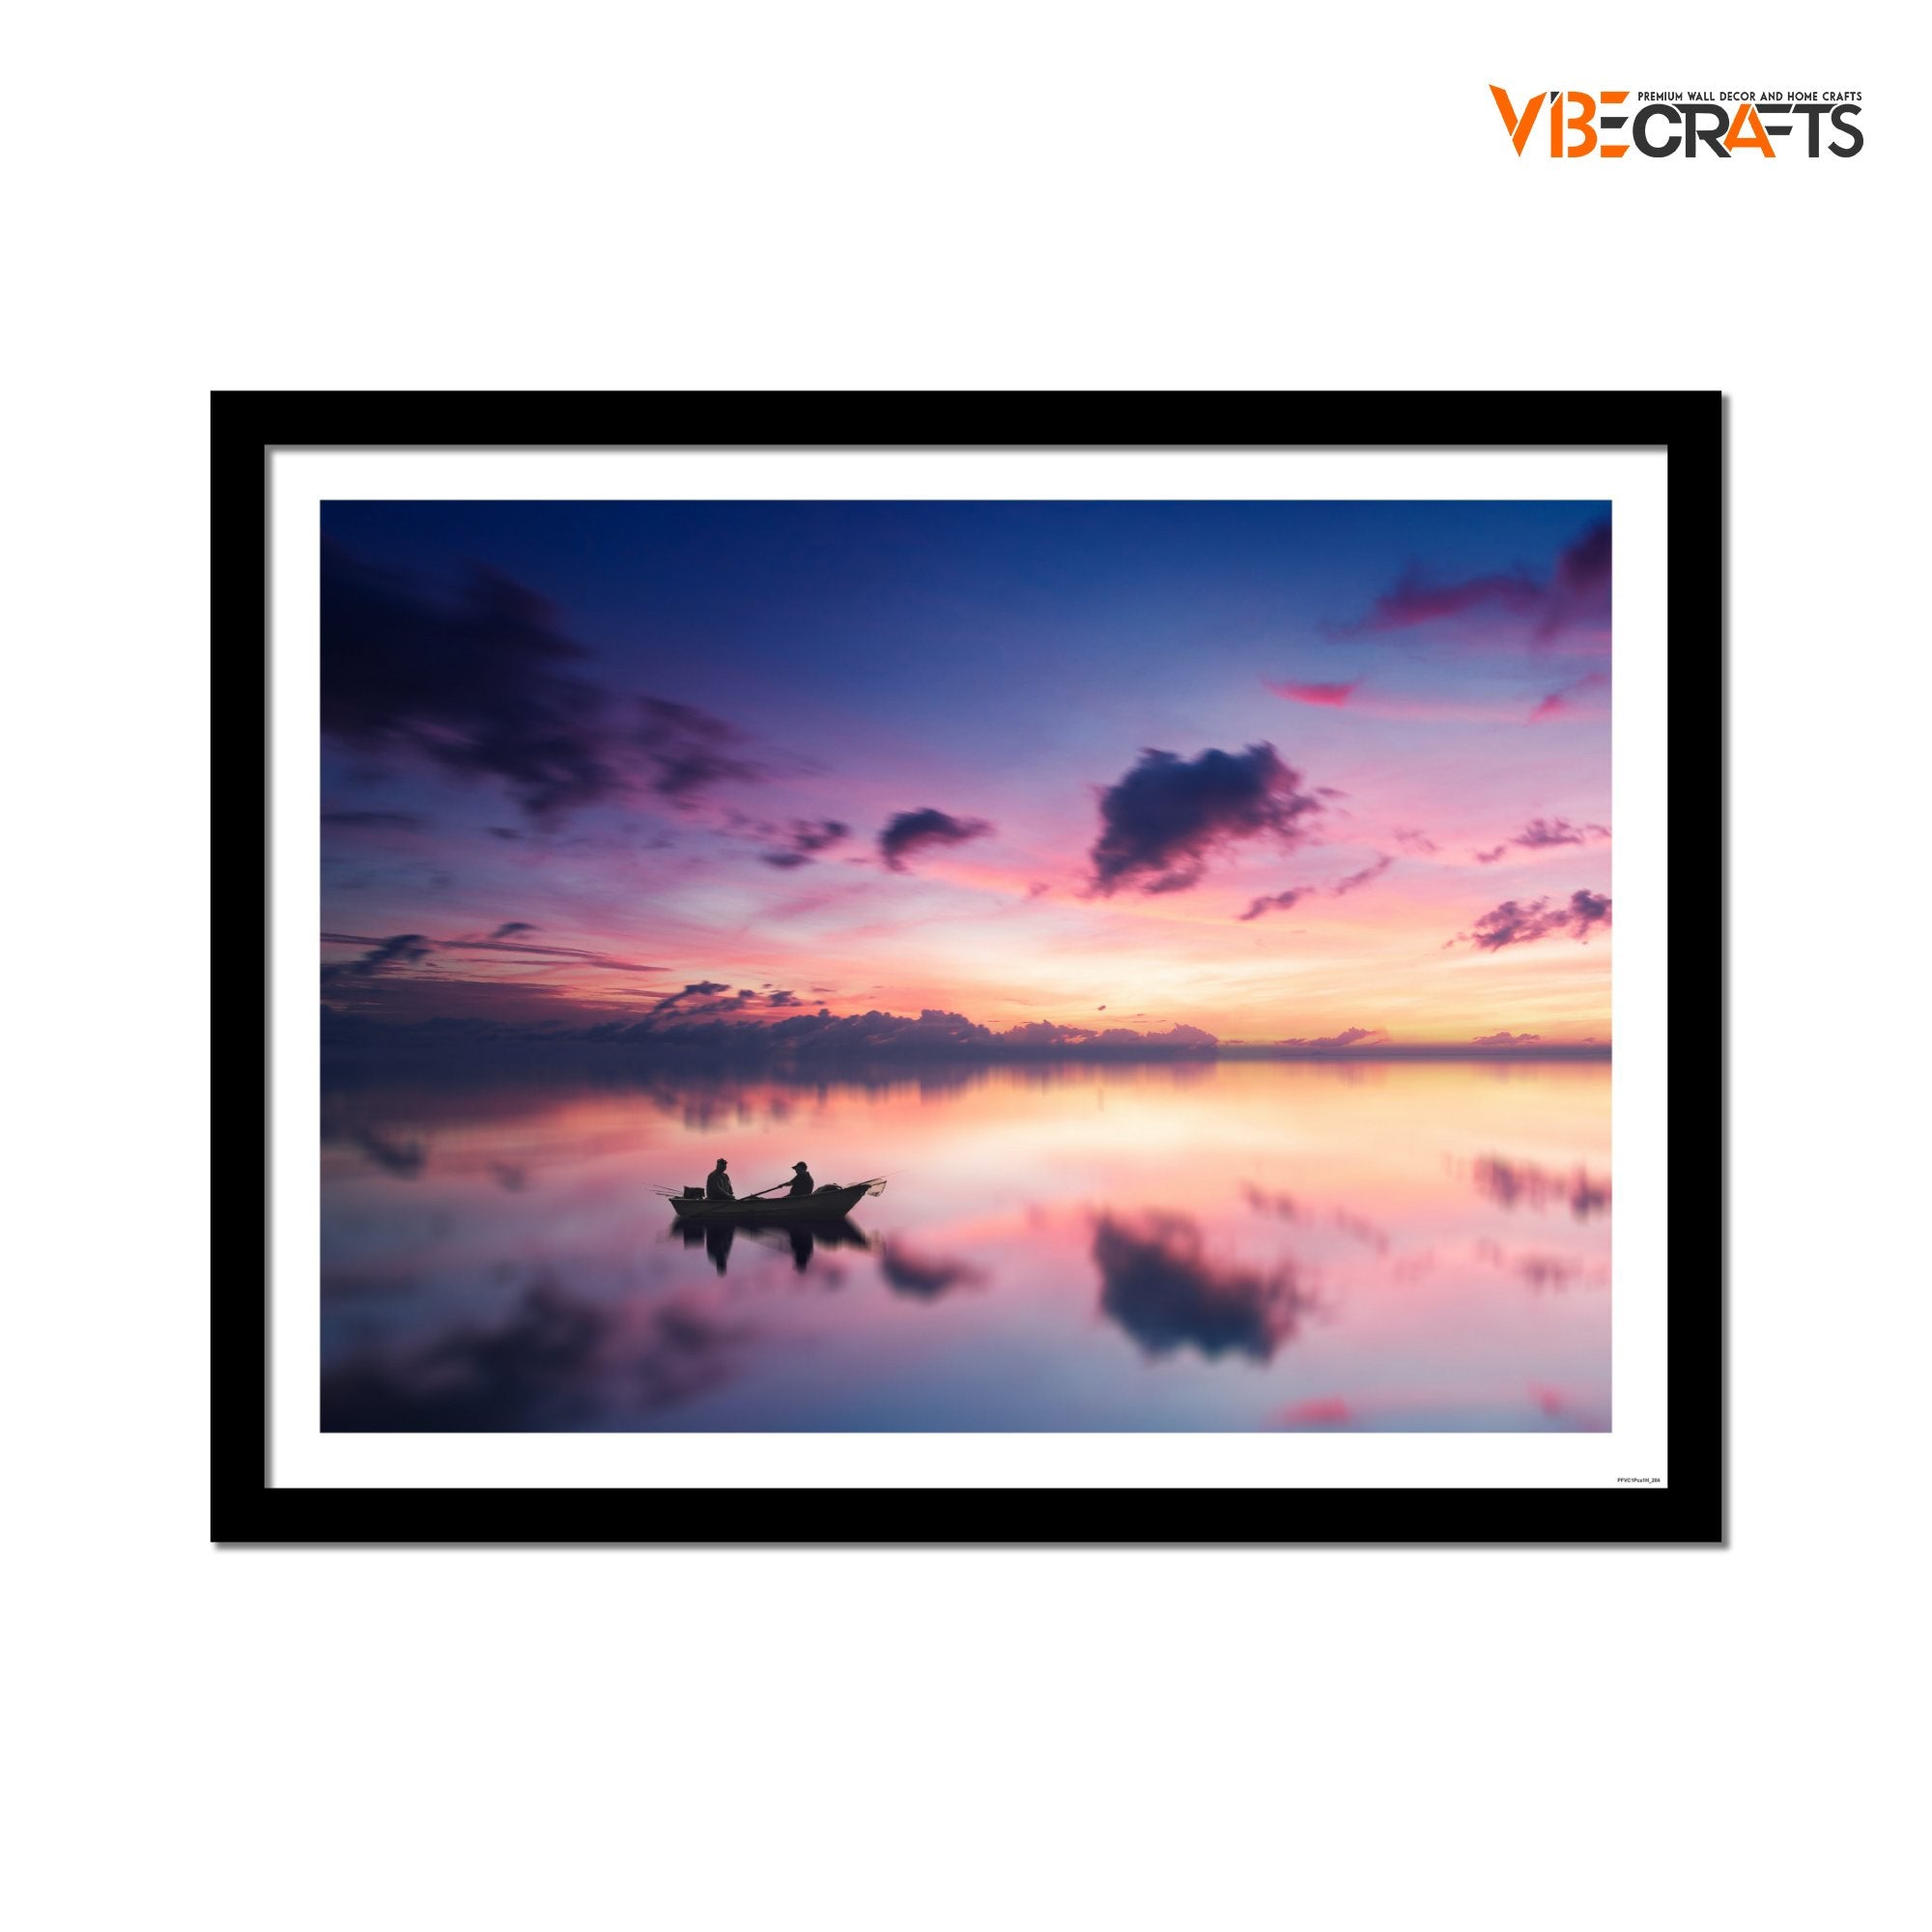 Framed Wall Painting of Beautiful Sunset View of Horizon